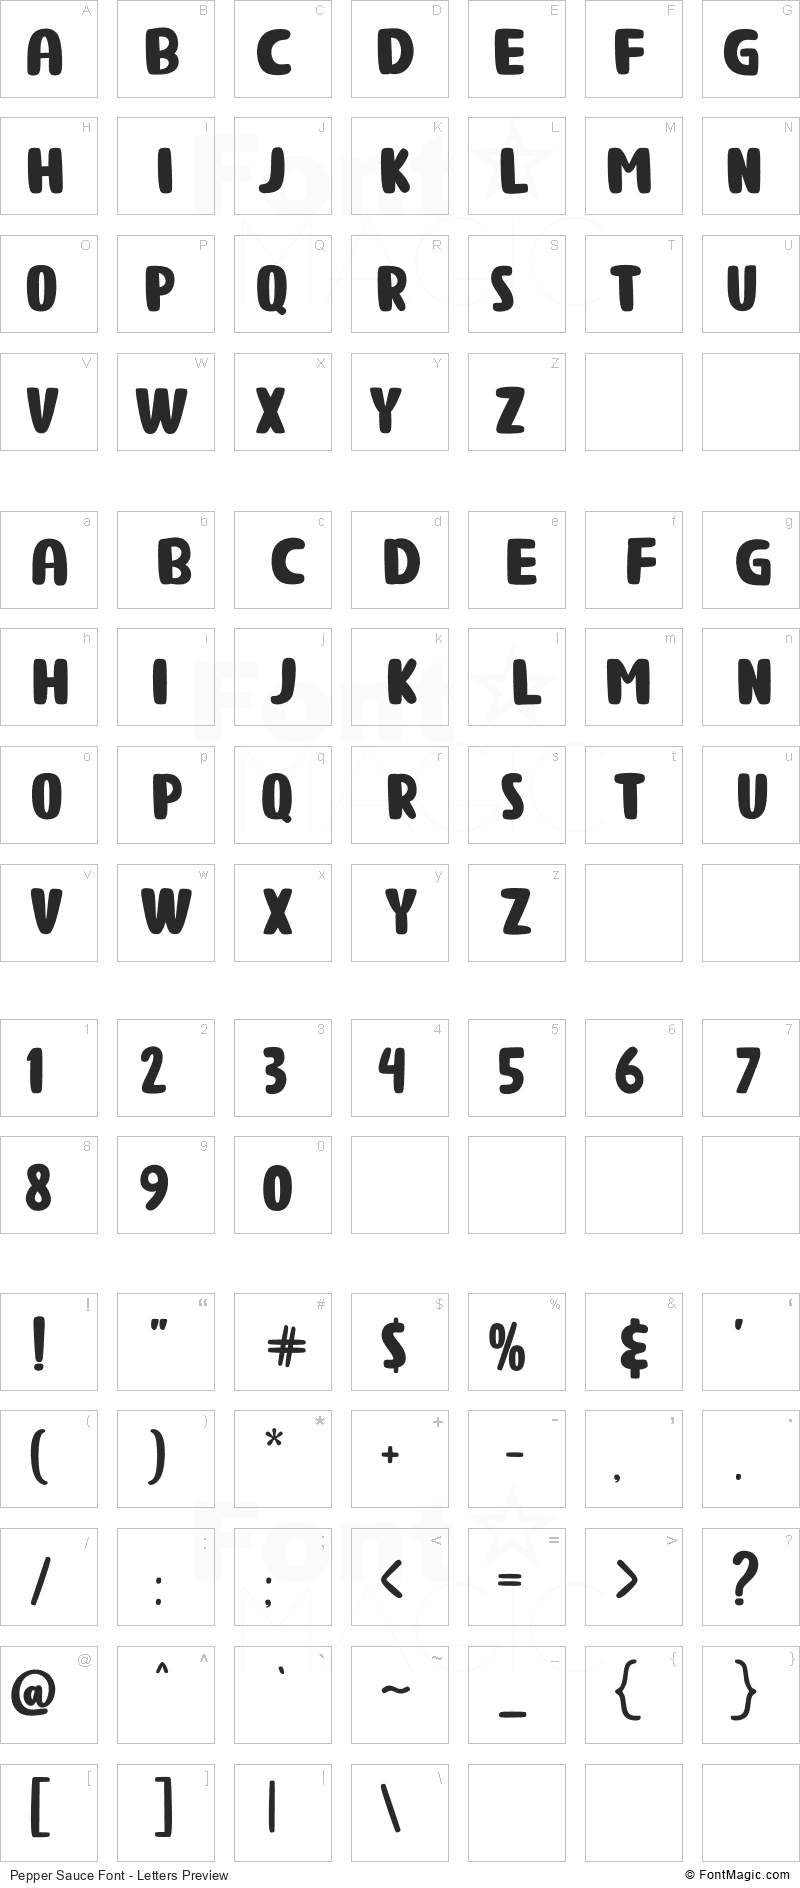 Pepper Sauce Font - All Latters Preview Chart